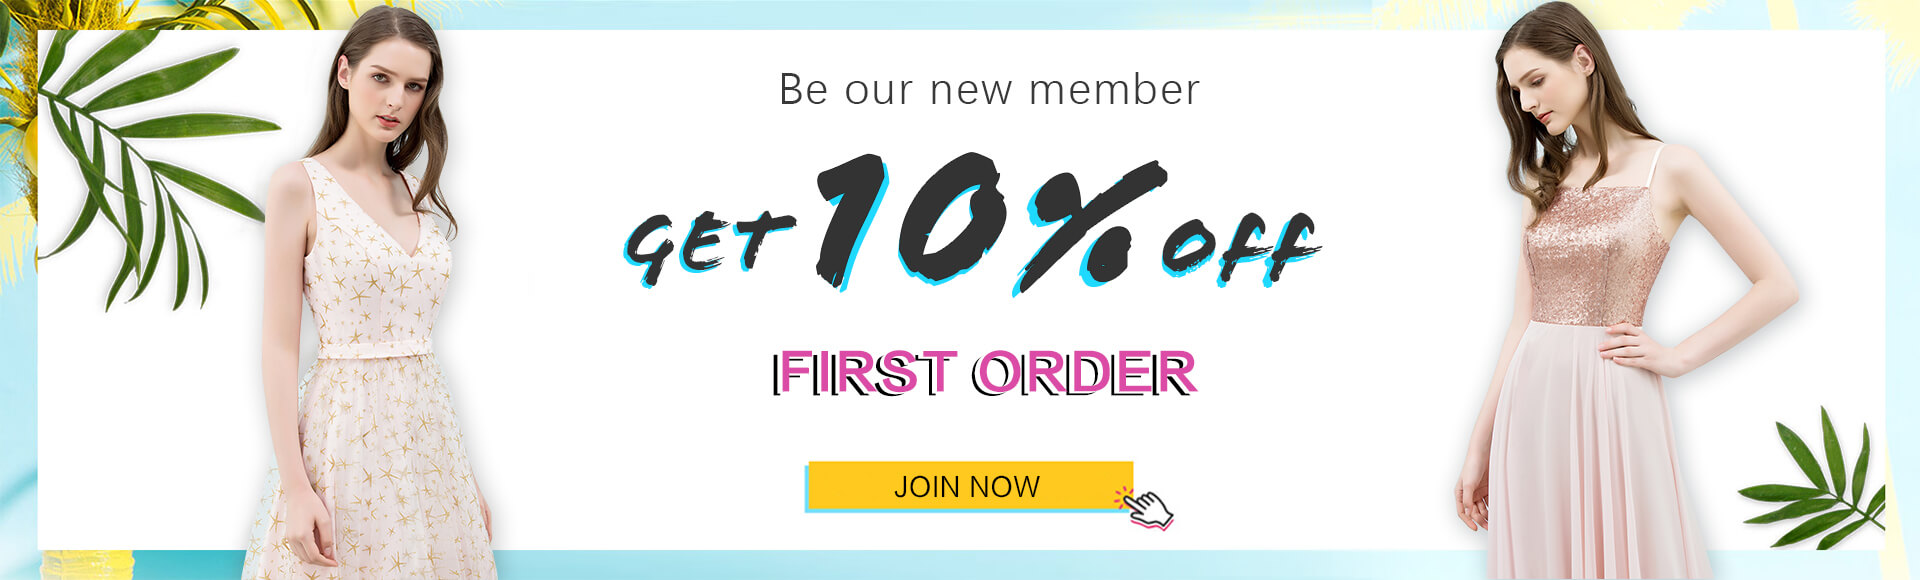 first order discount 